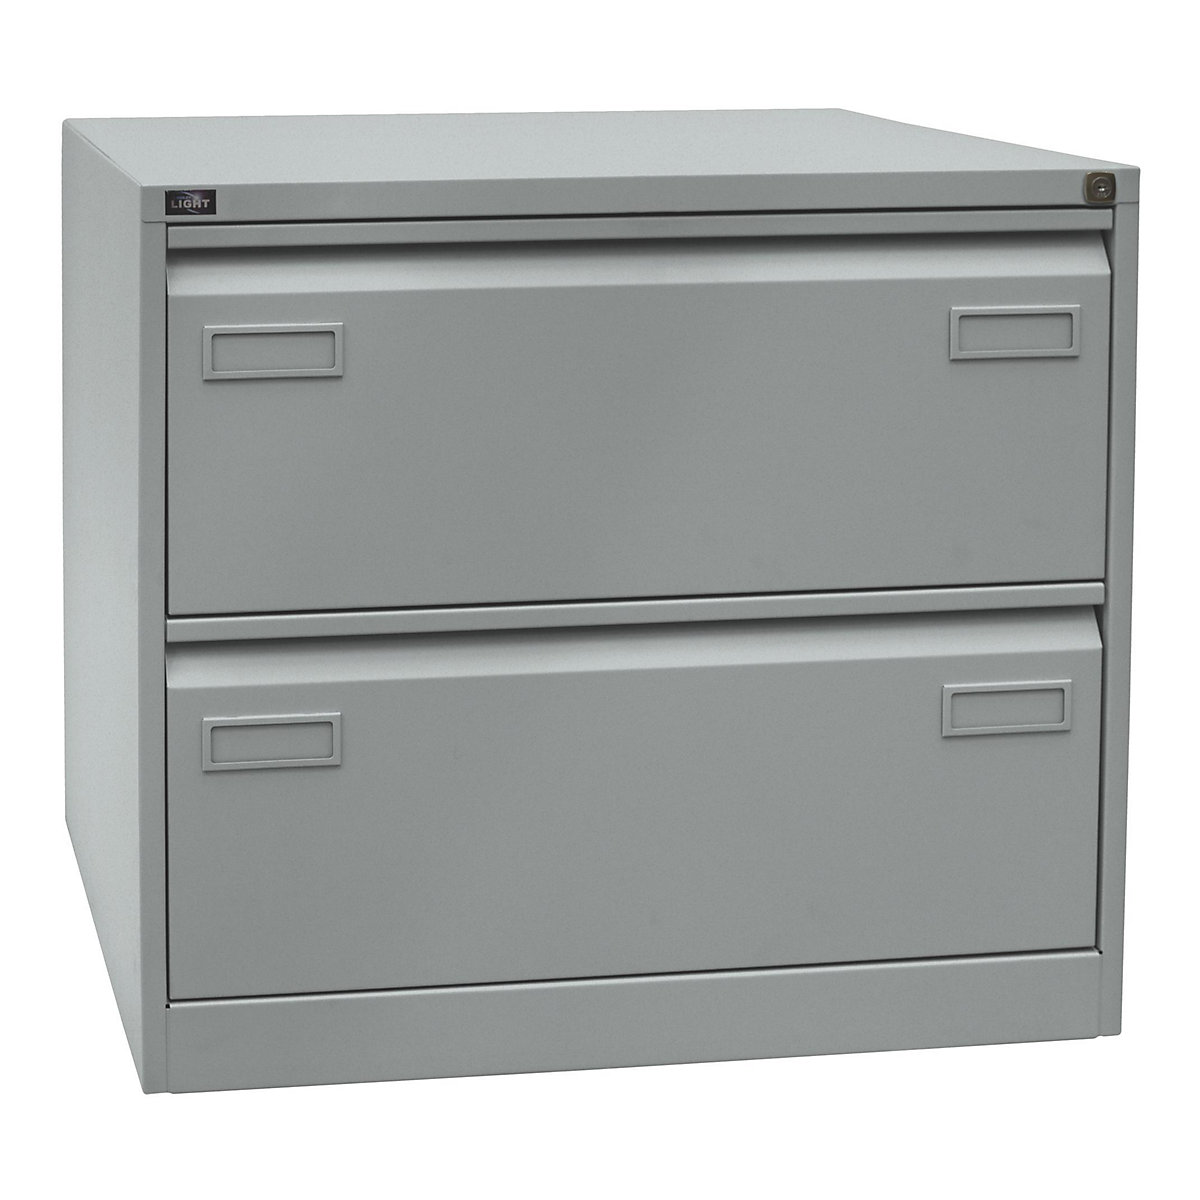 LIGHT suspension file cabinet, 2-track – BISLEY, 2 A4 drawers, silver-3